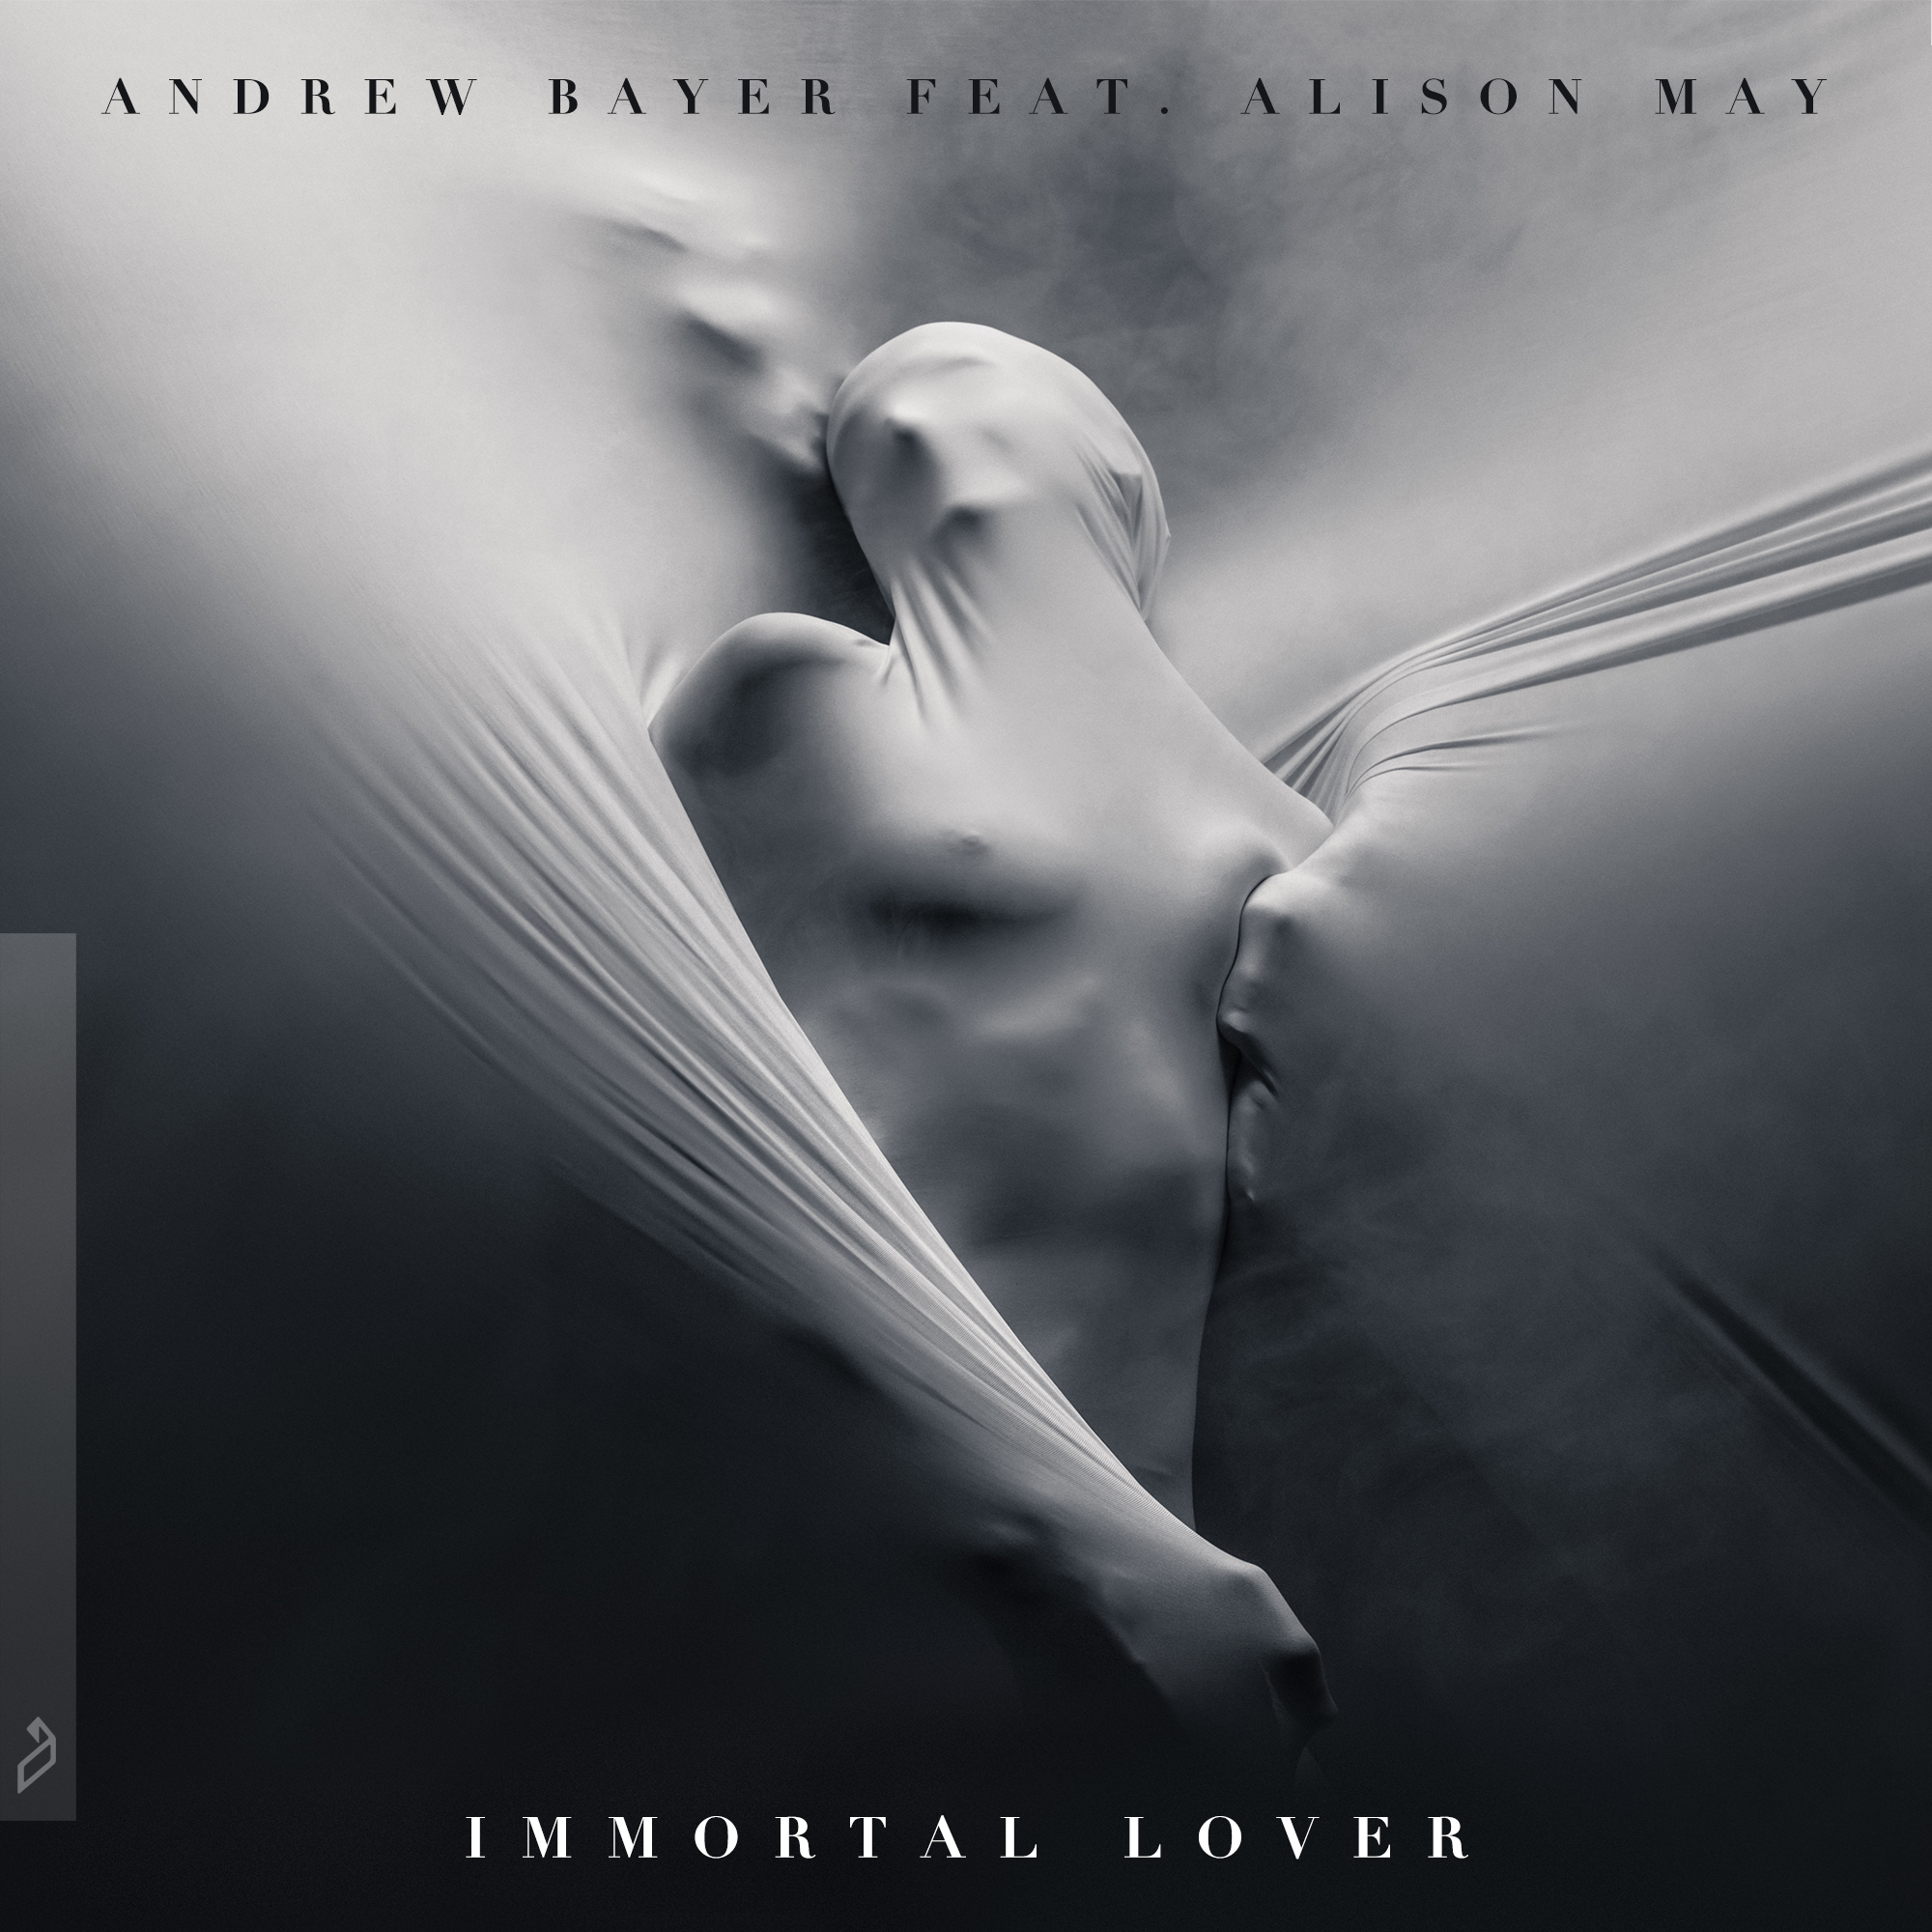 Andrew Bayer ft. featuring Alison May Immortal Lover cover artwork